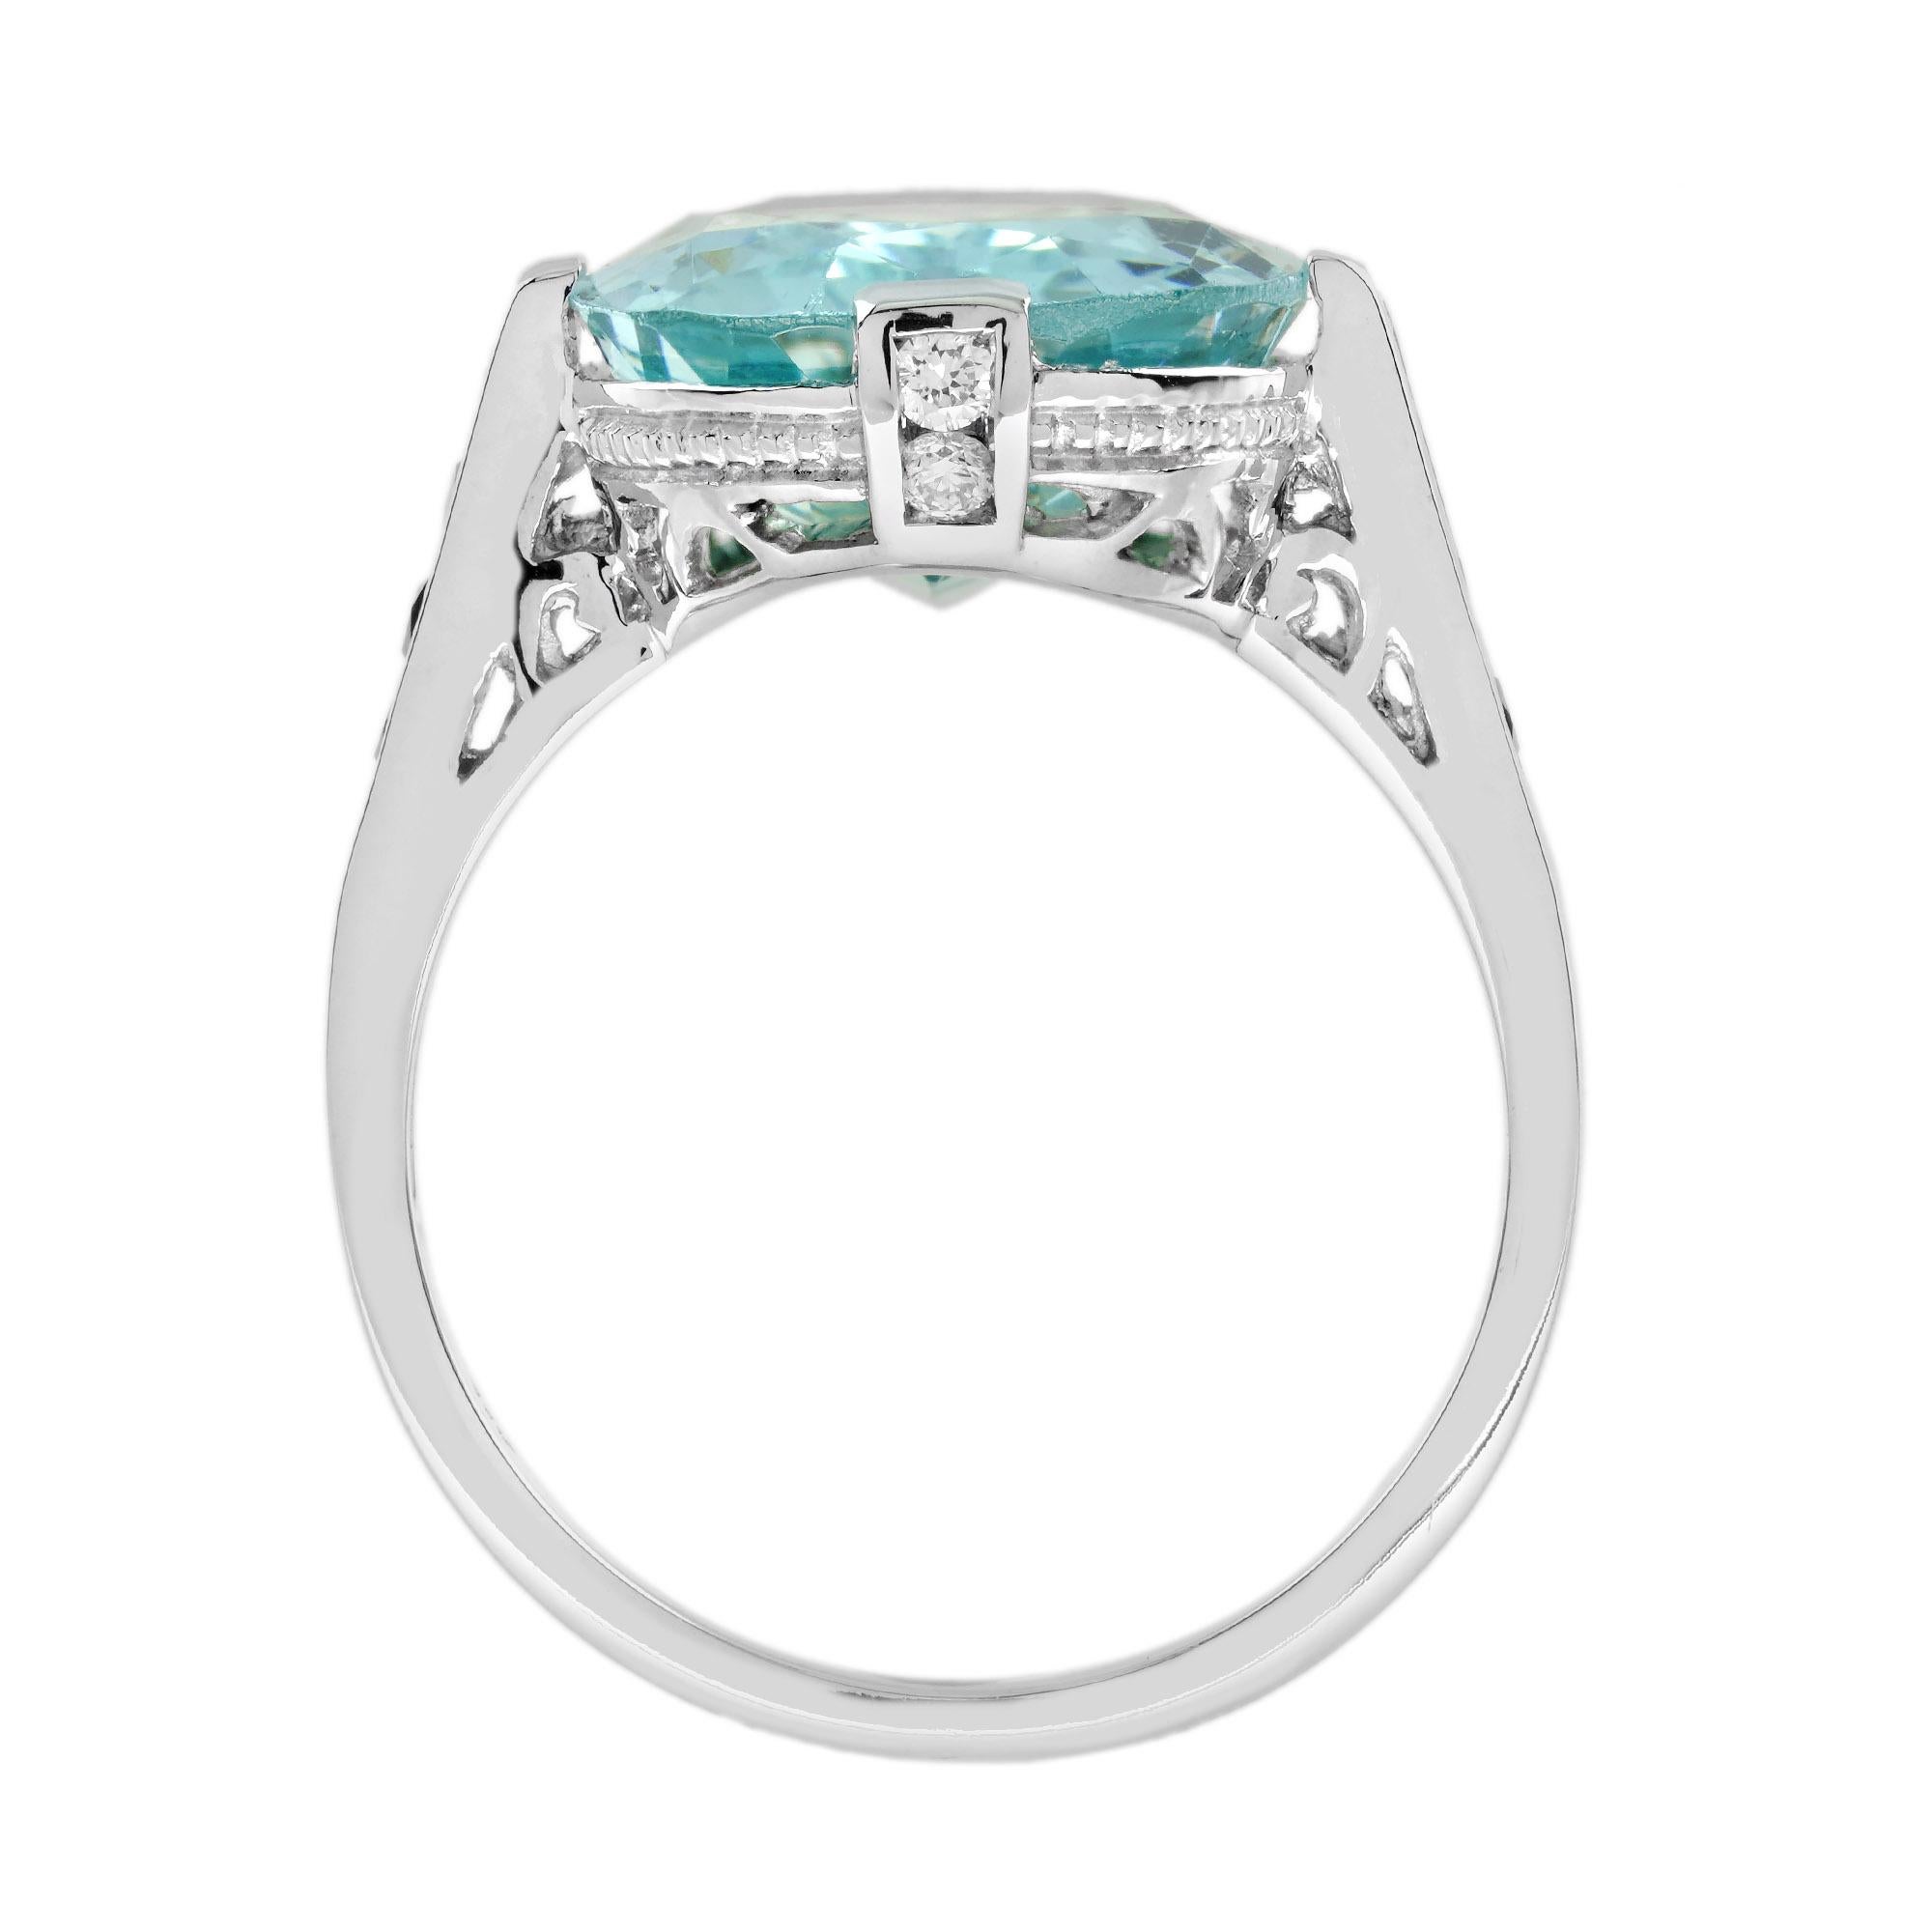 6.34 Ct. Aquamarine and Ruby Antique Design Cocktail Ring in 14K White Gold For Sale 1